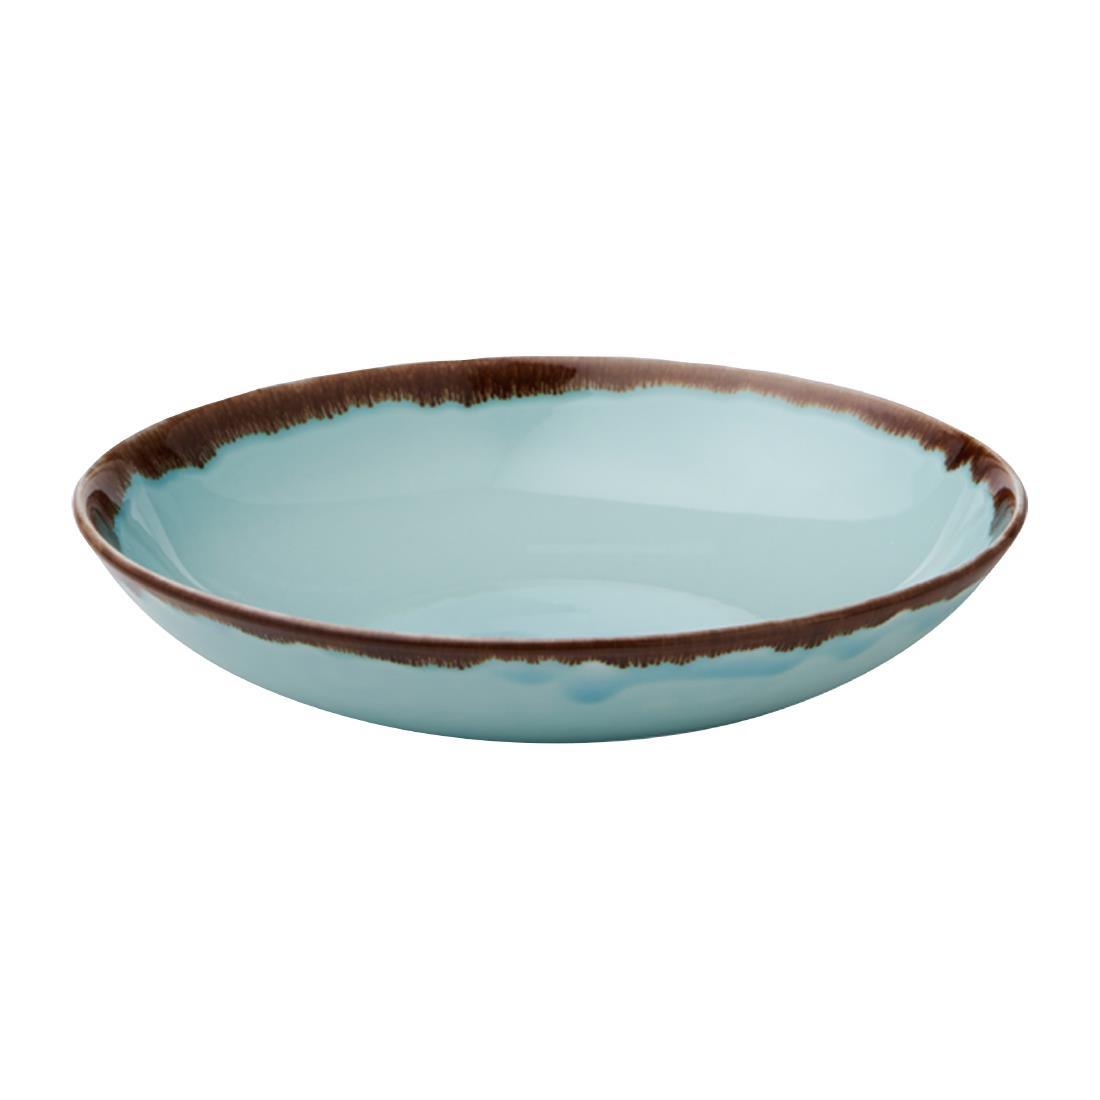 Dudson Harvest Coupe Bowls Turquoise 248mm (Pack of 12) - FX166  - 2